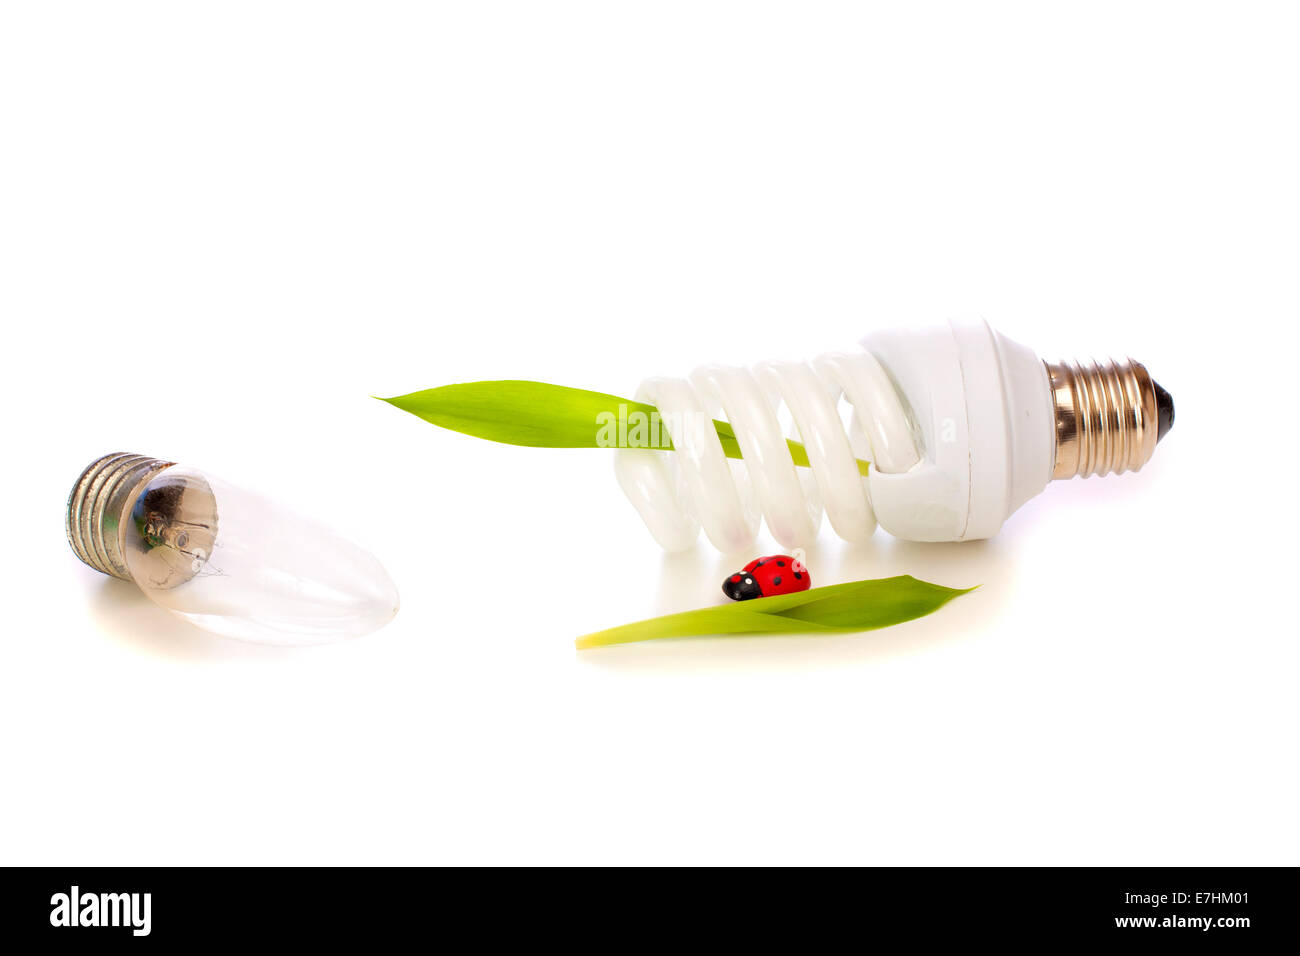 One eco lightbulb with green leaf and one old lightbulb with filament isolated over white background Stock Photo